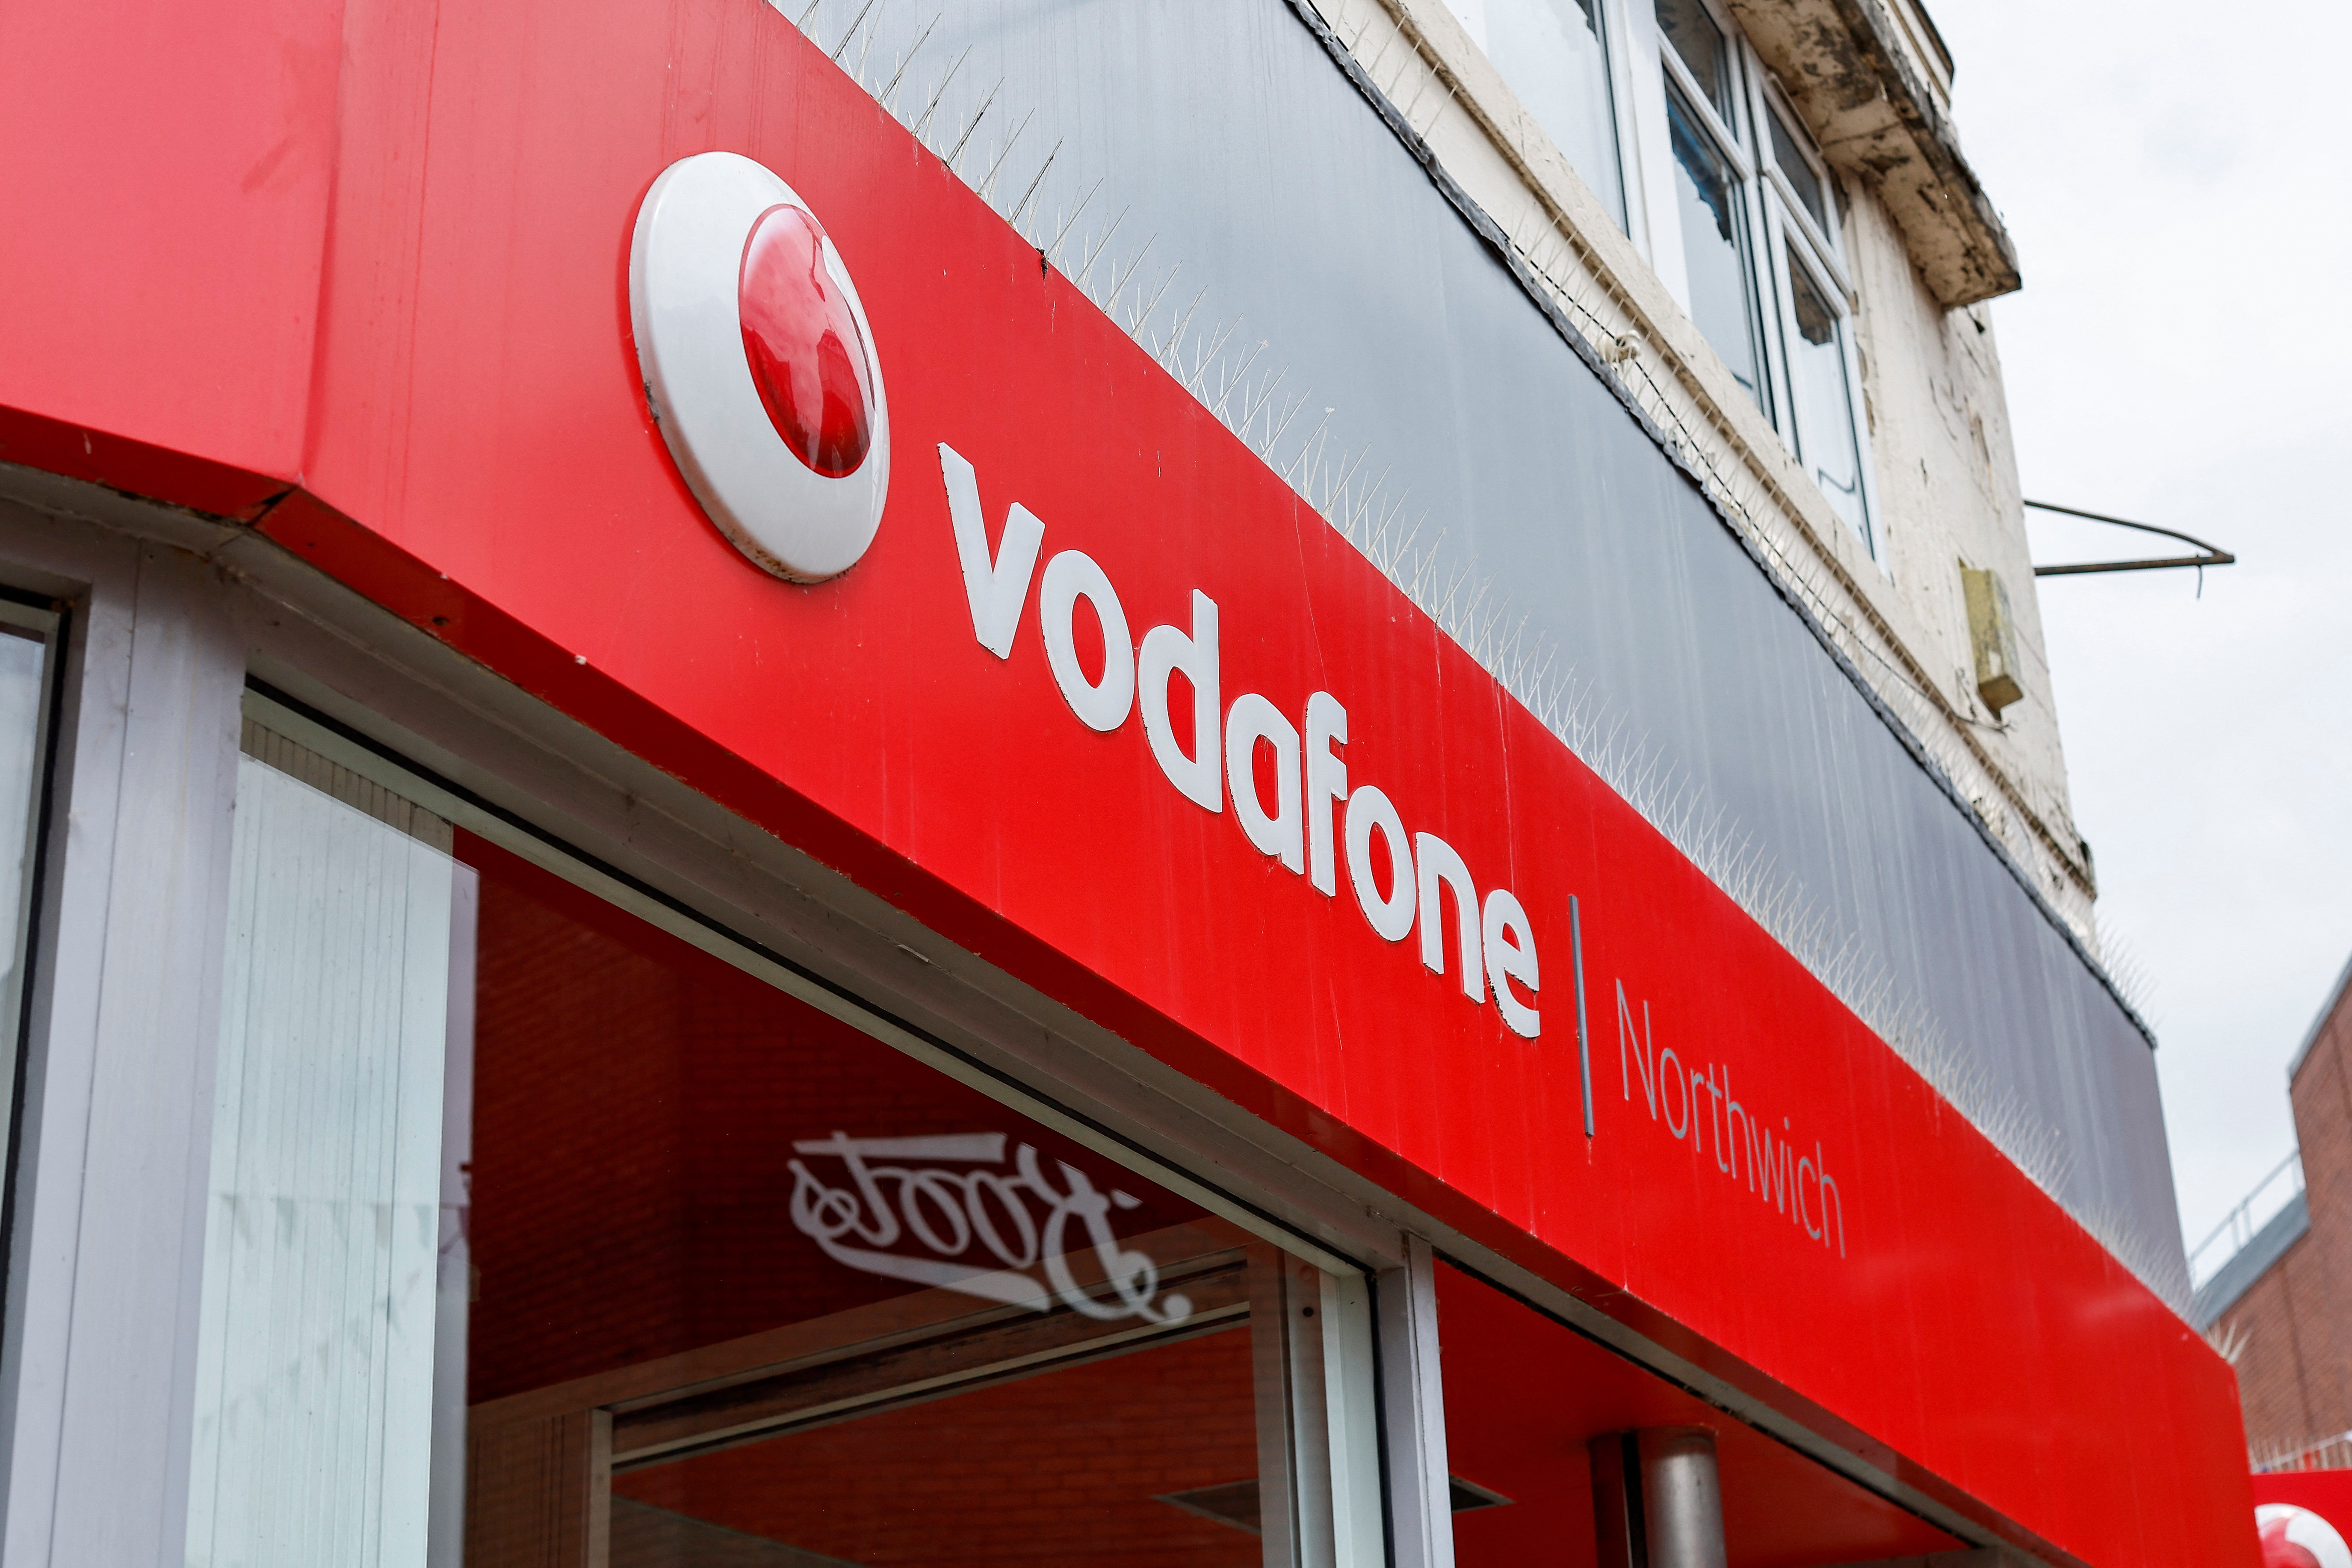 The Vodafone logo can be seen in a Vodafone store in Northwich